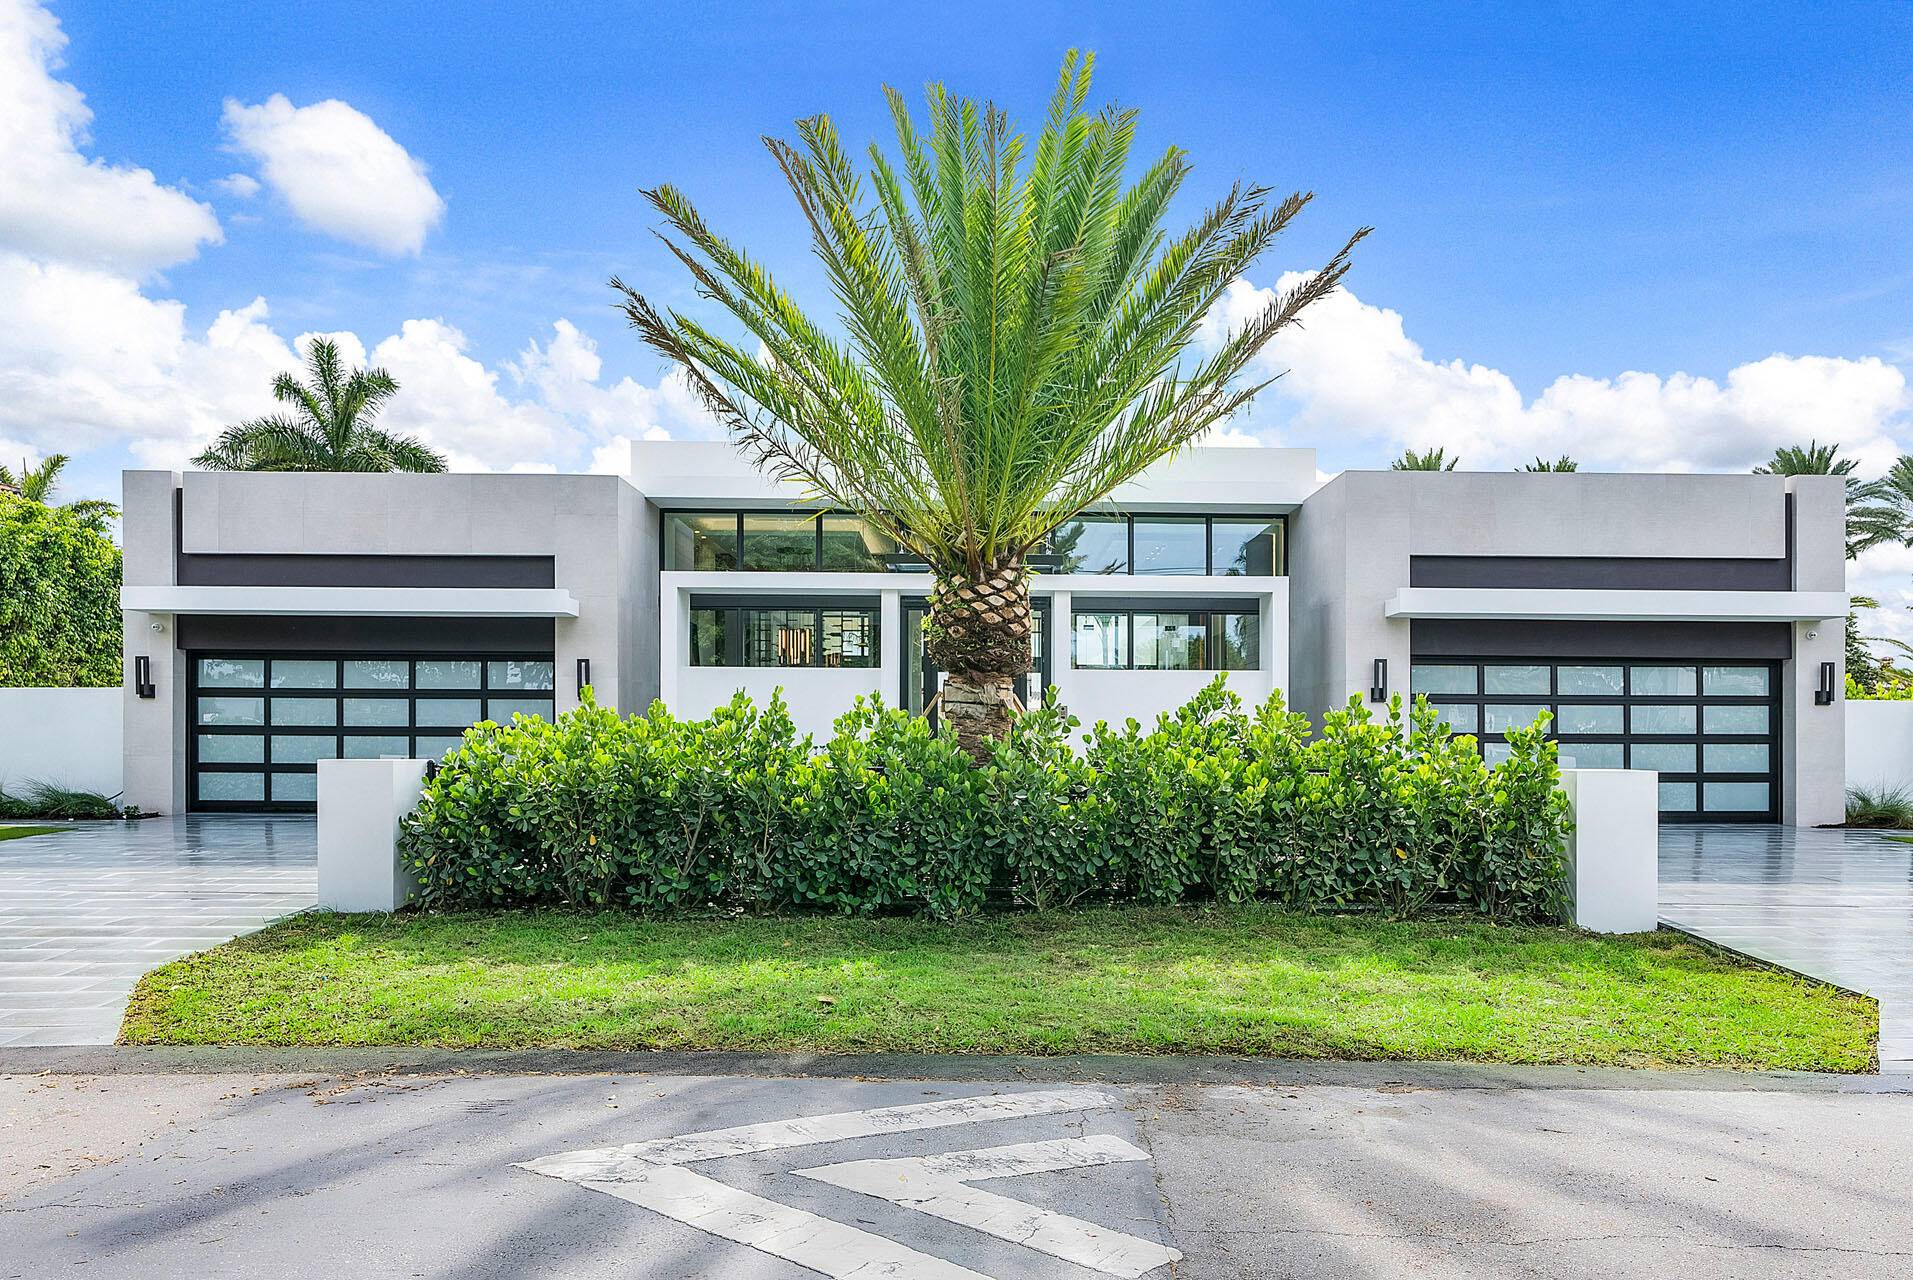 Nearly new Intracoastal home by Borrero Architecture, located in the Estates Section of Boca Raton, in close proximity to the beach.